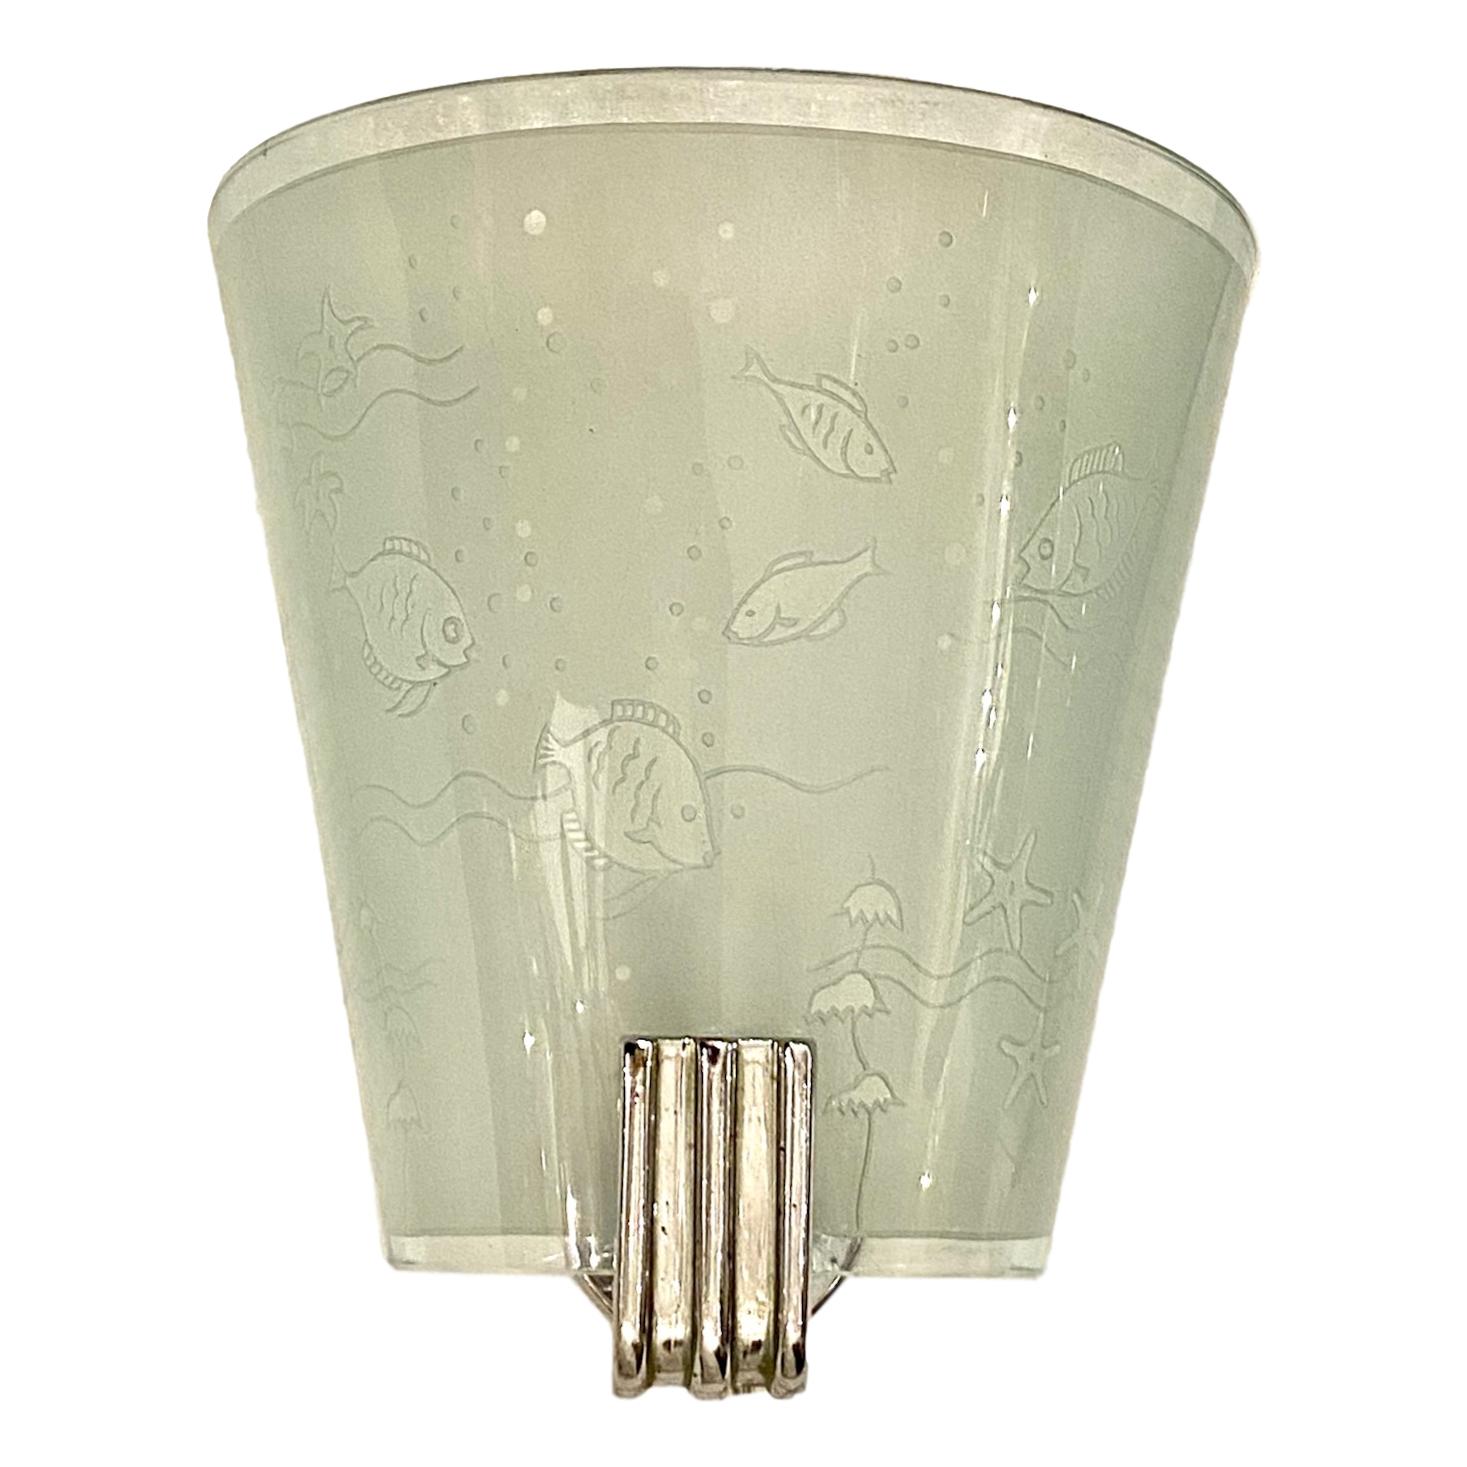 A pair of circa 1960s Italian etched glass slip shade sconces with a fish motif and single interior candelabra light.

Measurements:
Height 8